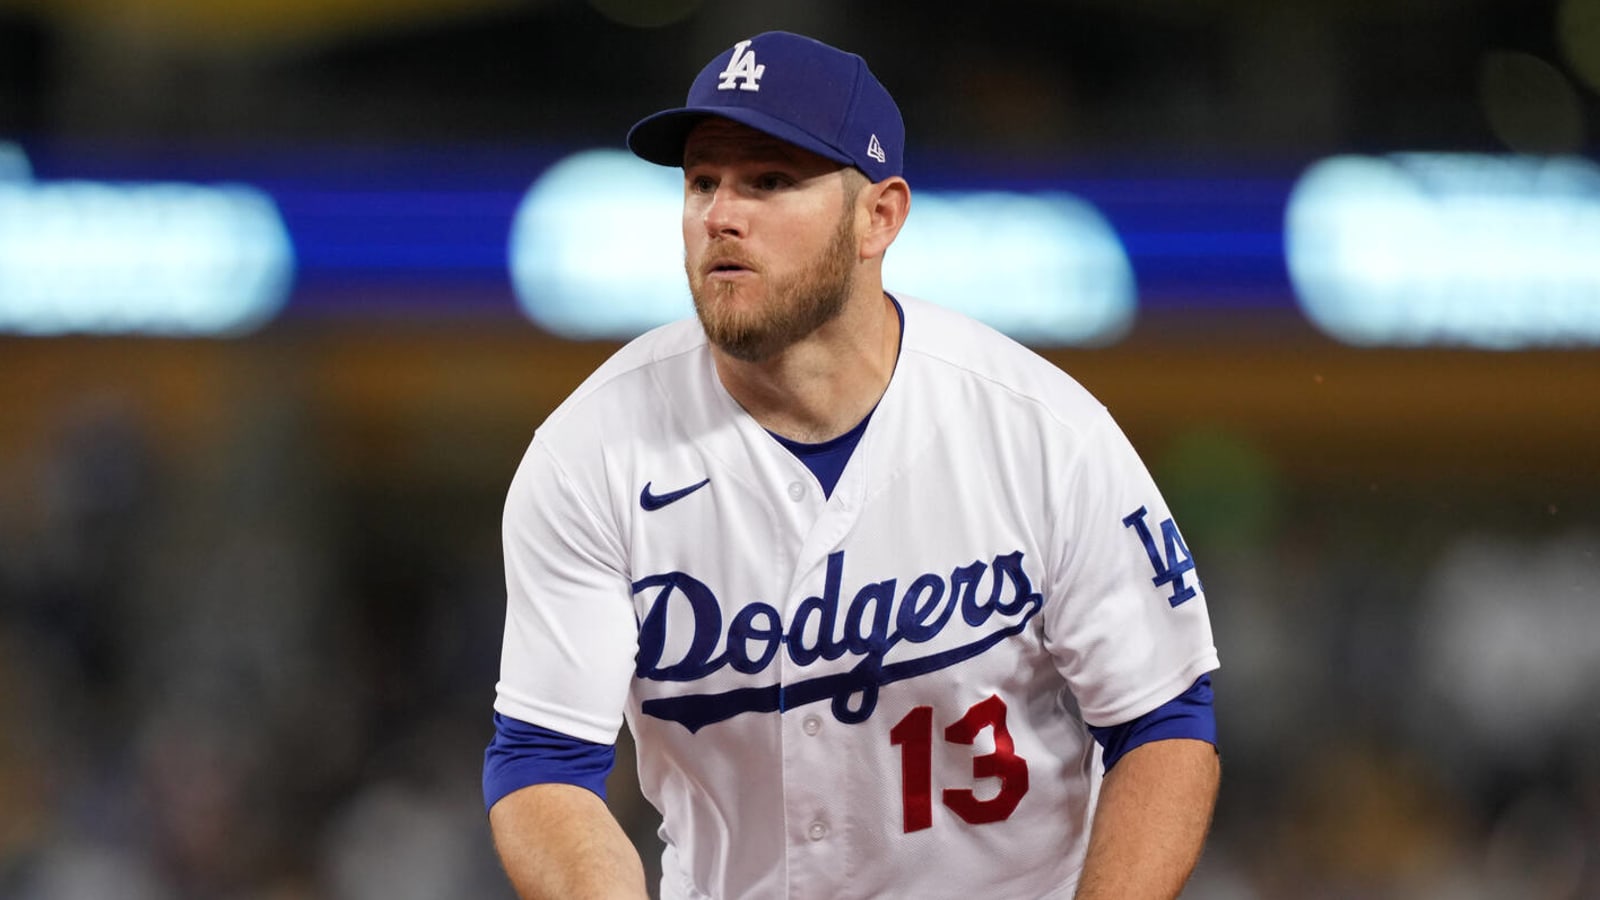 Dodgers place Max Muncy on 10-day IL due to elbow inflammation